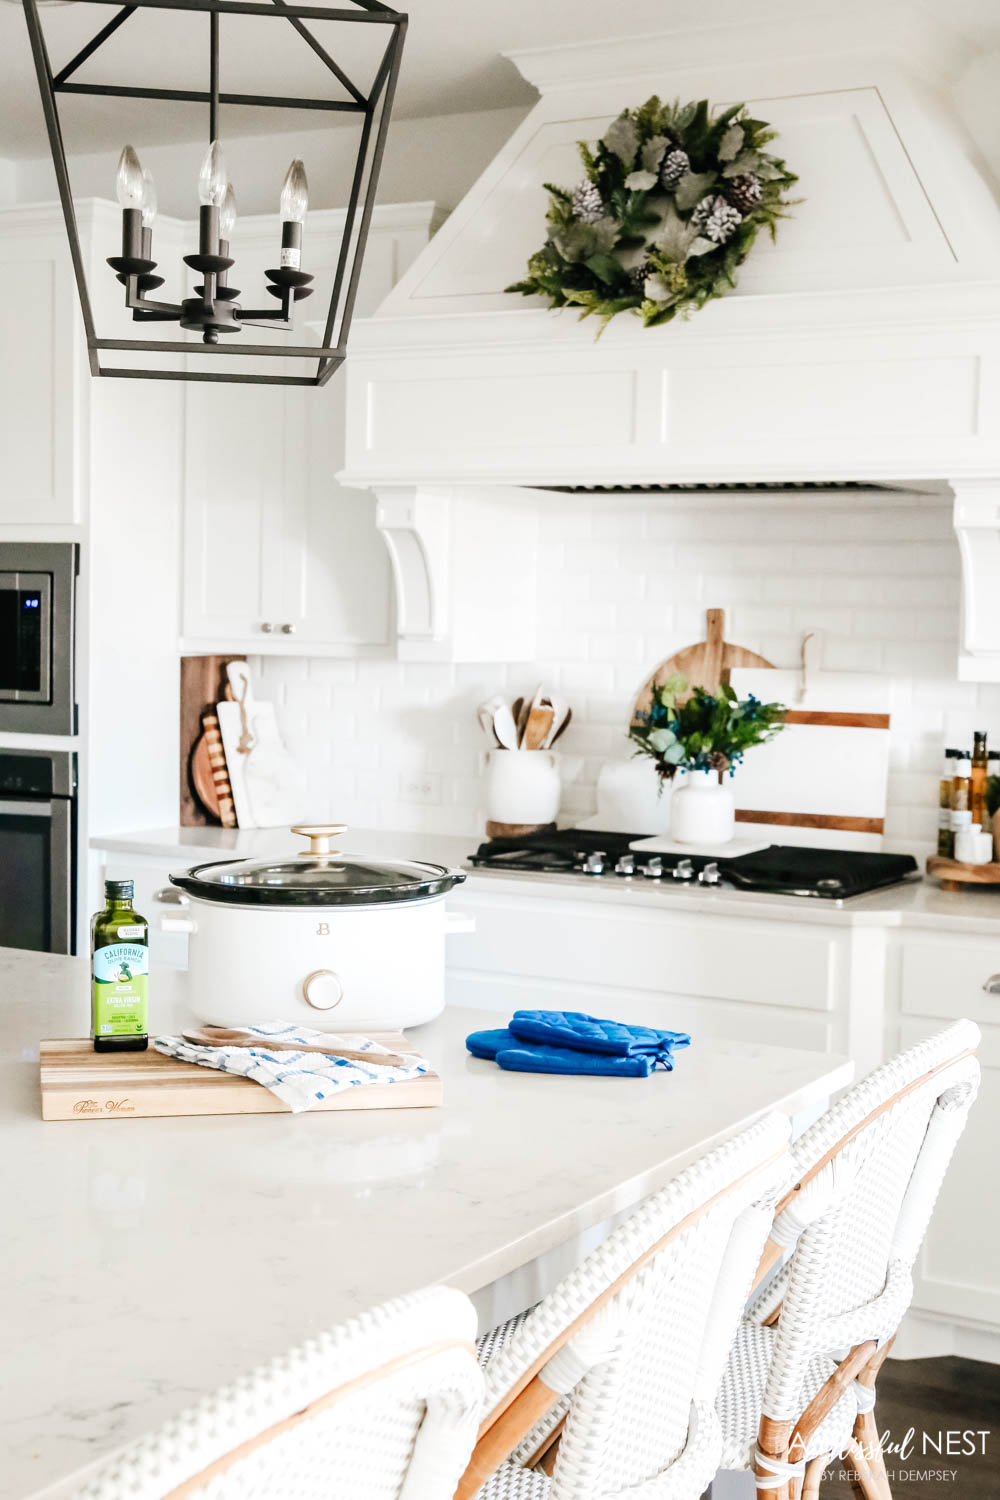 A white kitchen, with rattan barstools, white crockpot, navy blue potholders and a cooktop range with a wreath above. 